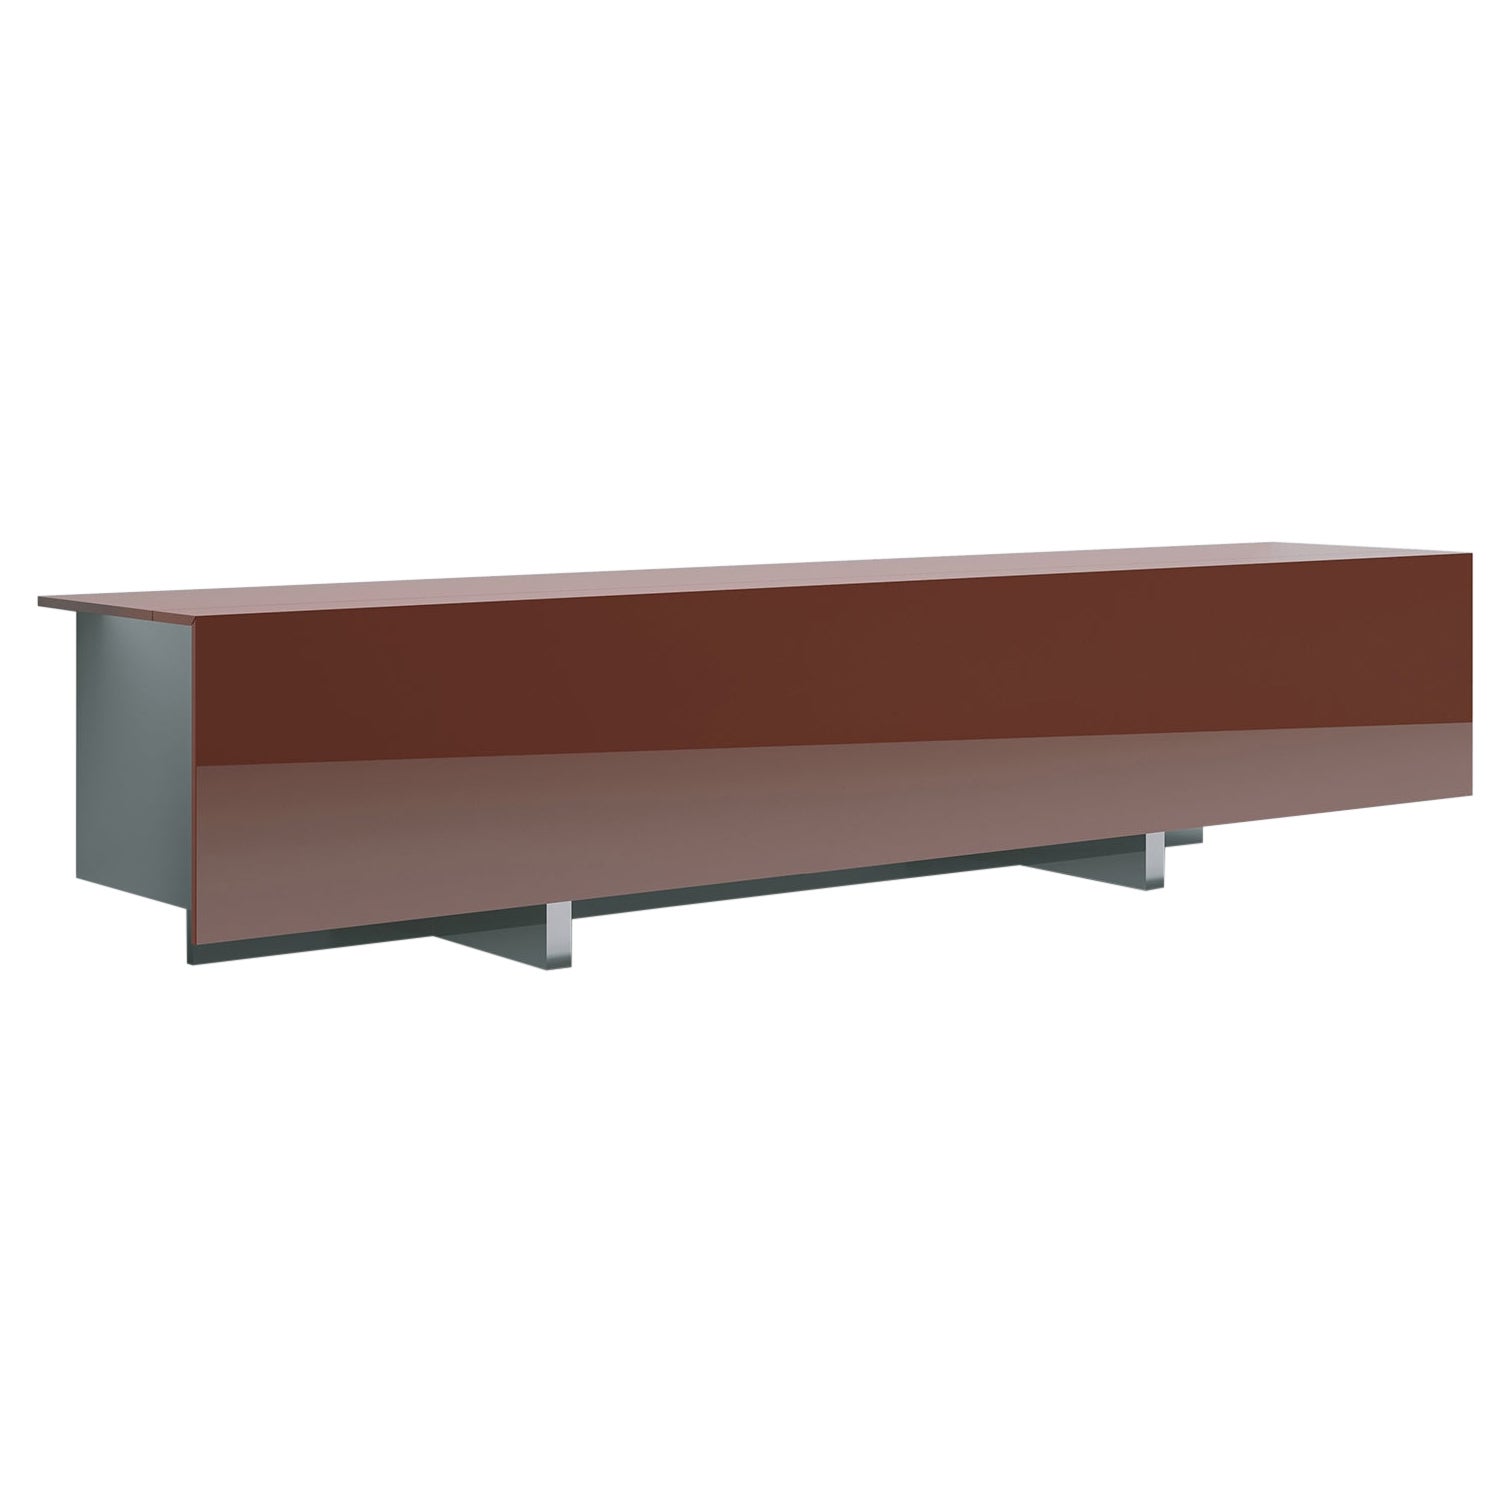 Acerbis Ludwig Large Sideboards in Brick Red Glossy Lacquered Top with Doors For Sale